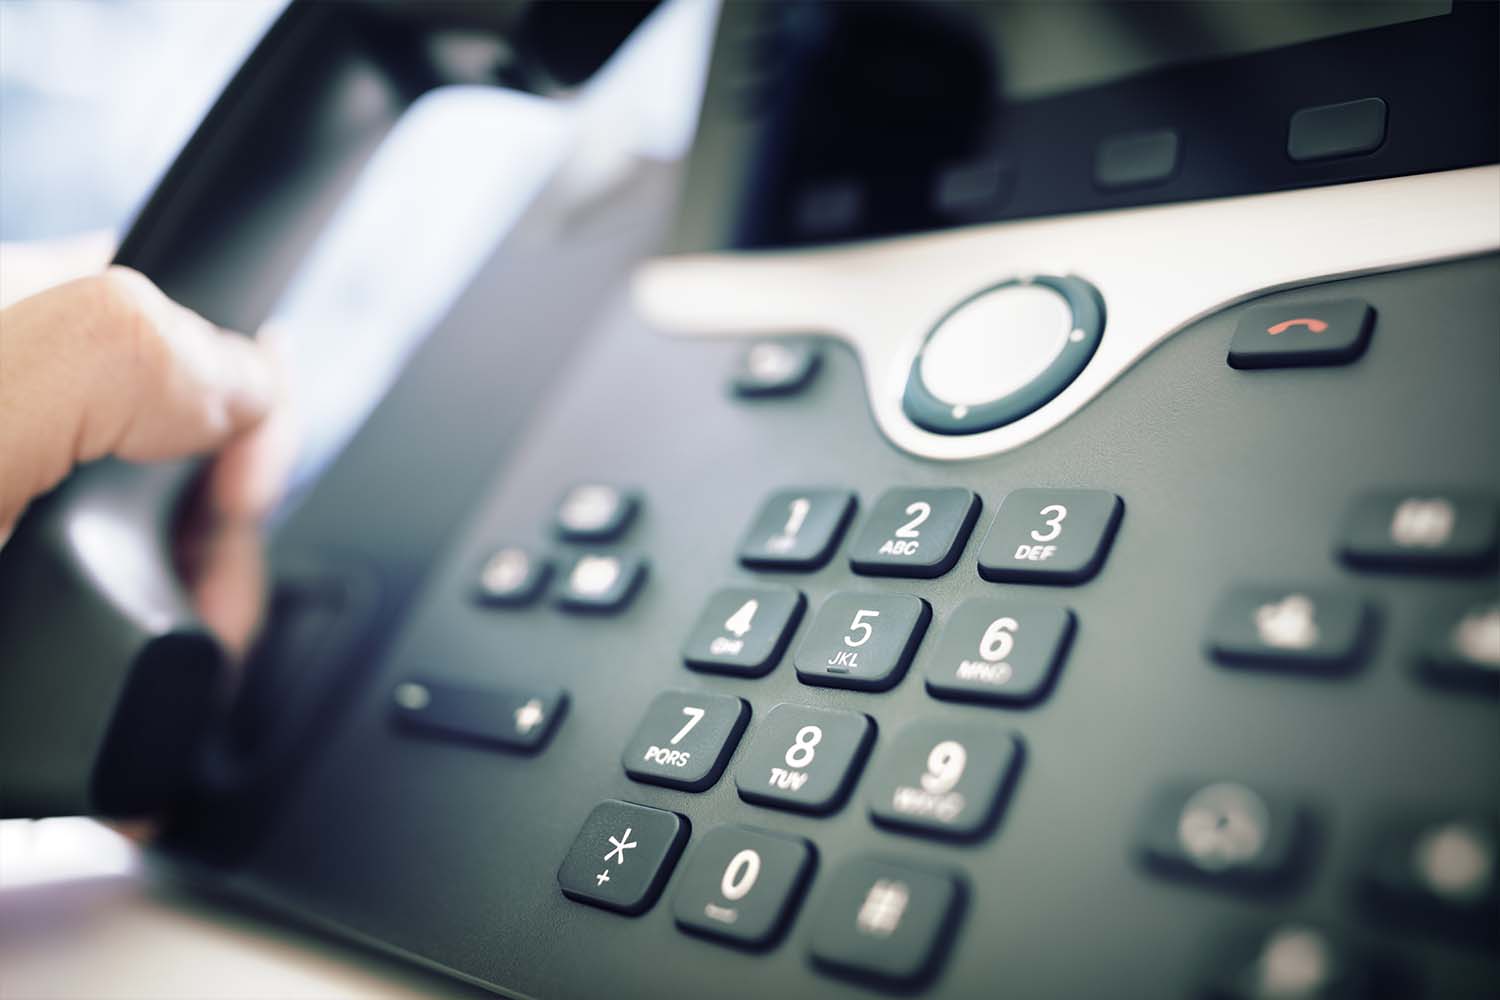 What is PSTN? (Public Switched Telephone Network)